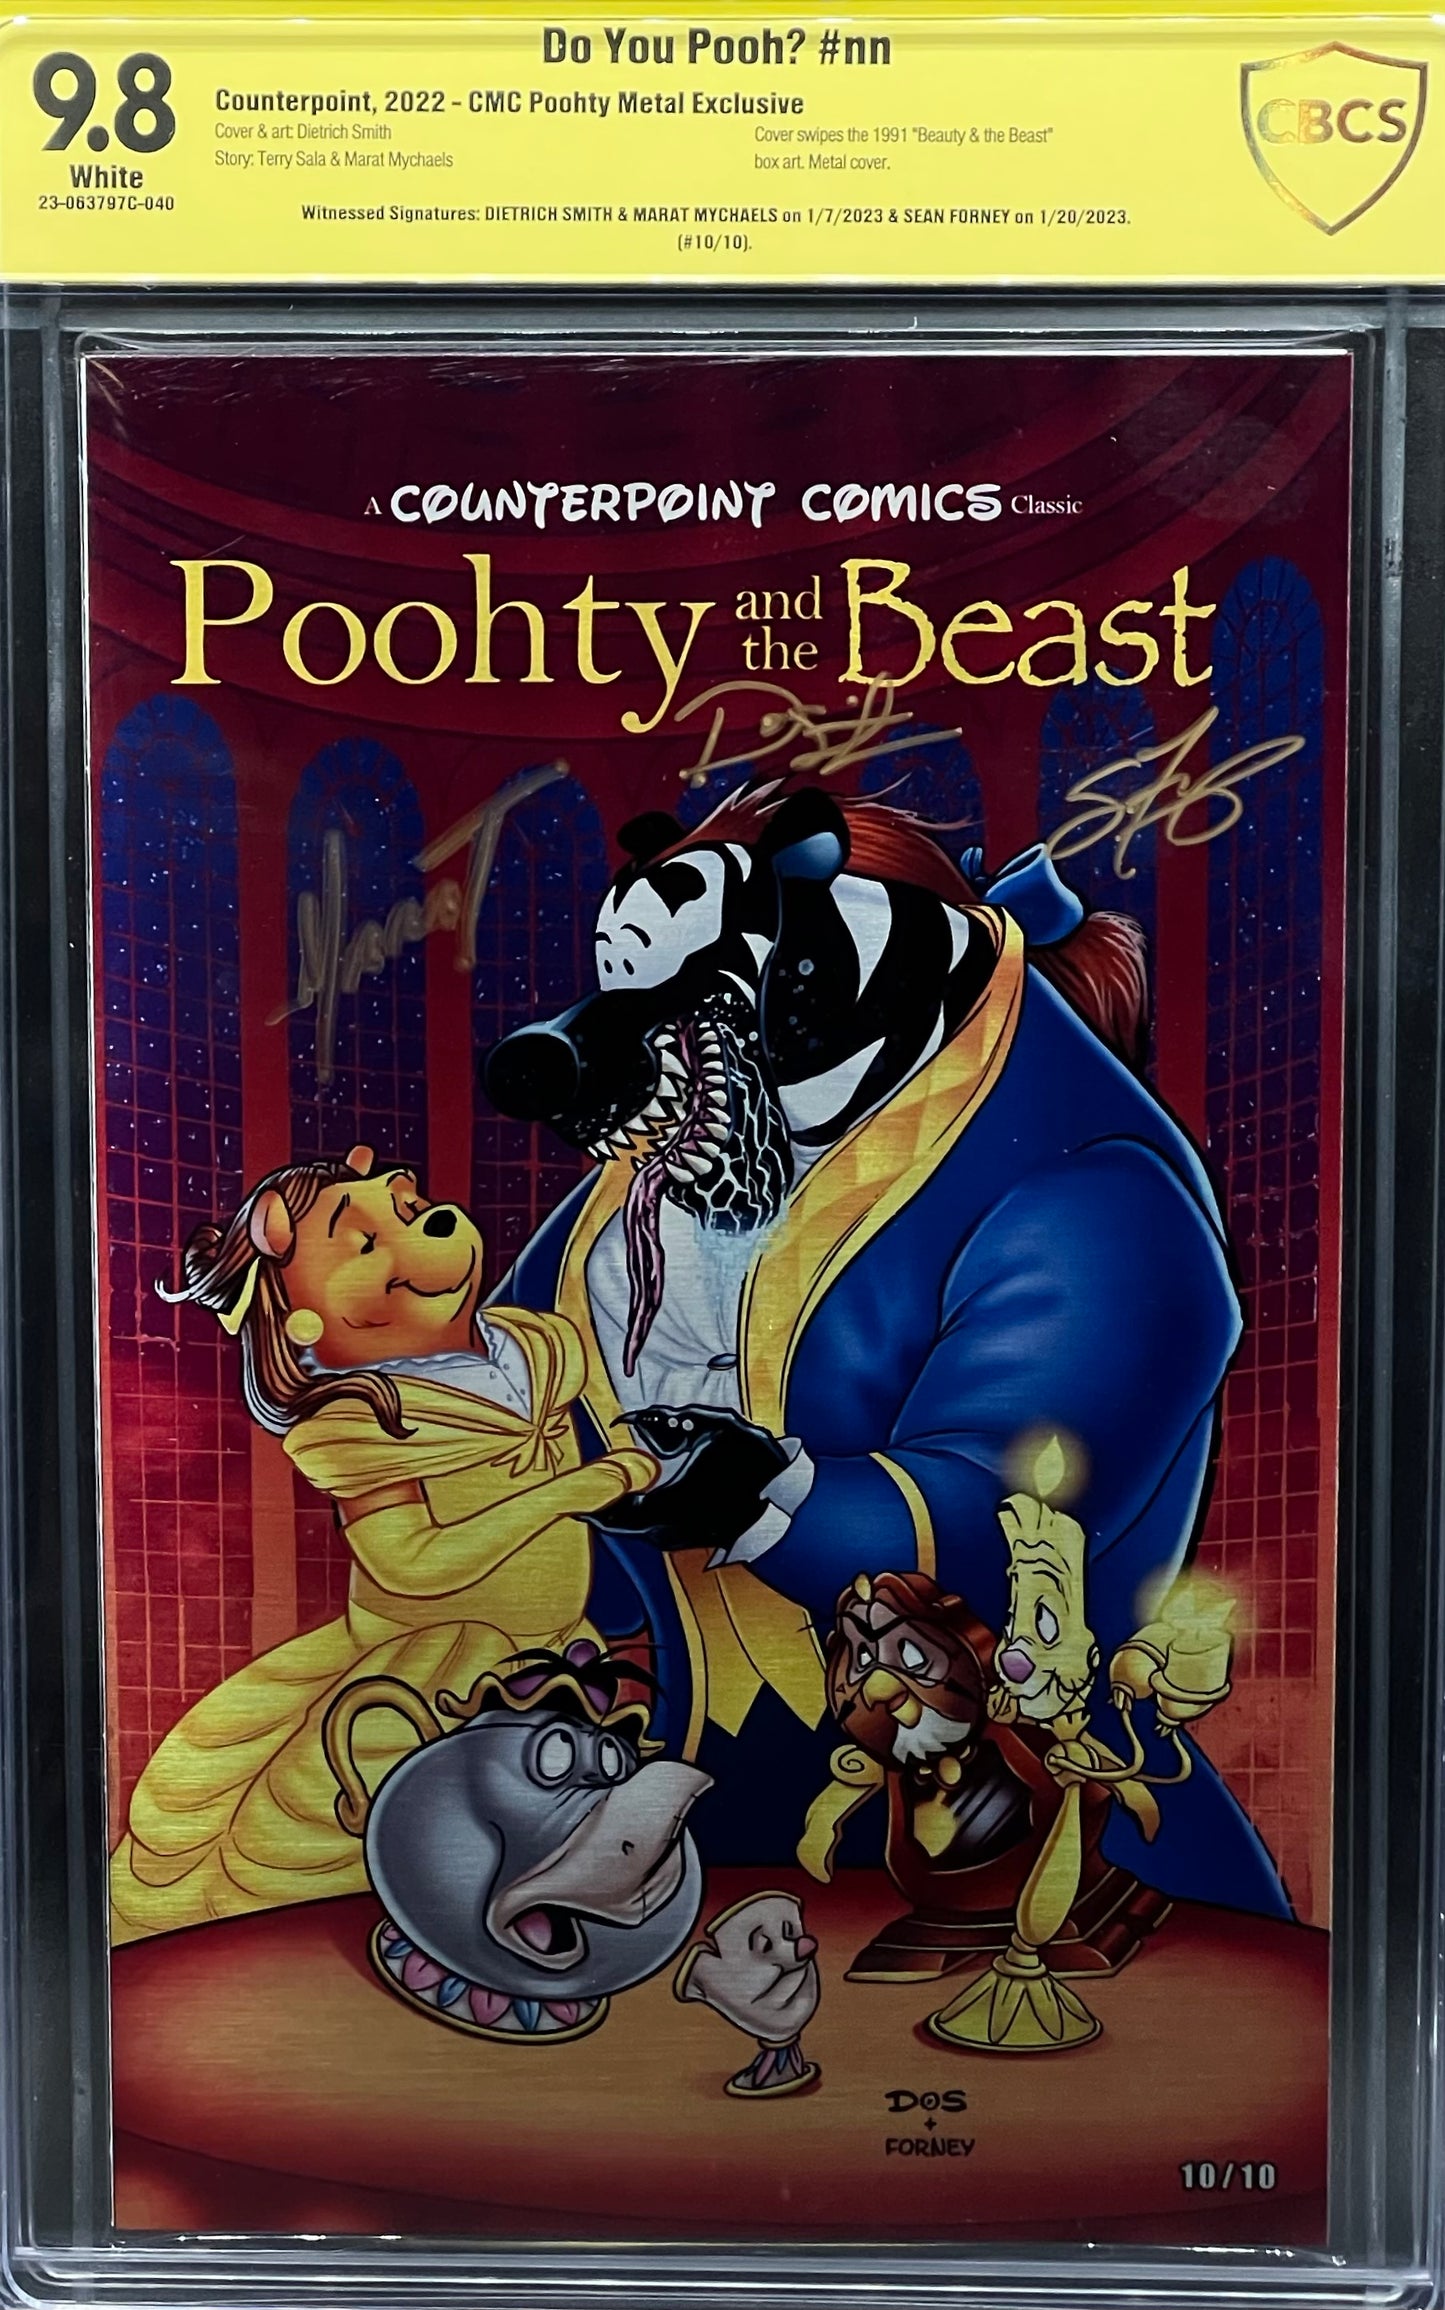 Do You Pooh? #nn CMC Poohty Metal Exclusive CBCS 9.8 Yellow Label ~ Triple Signed!